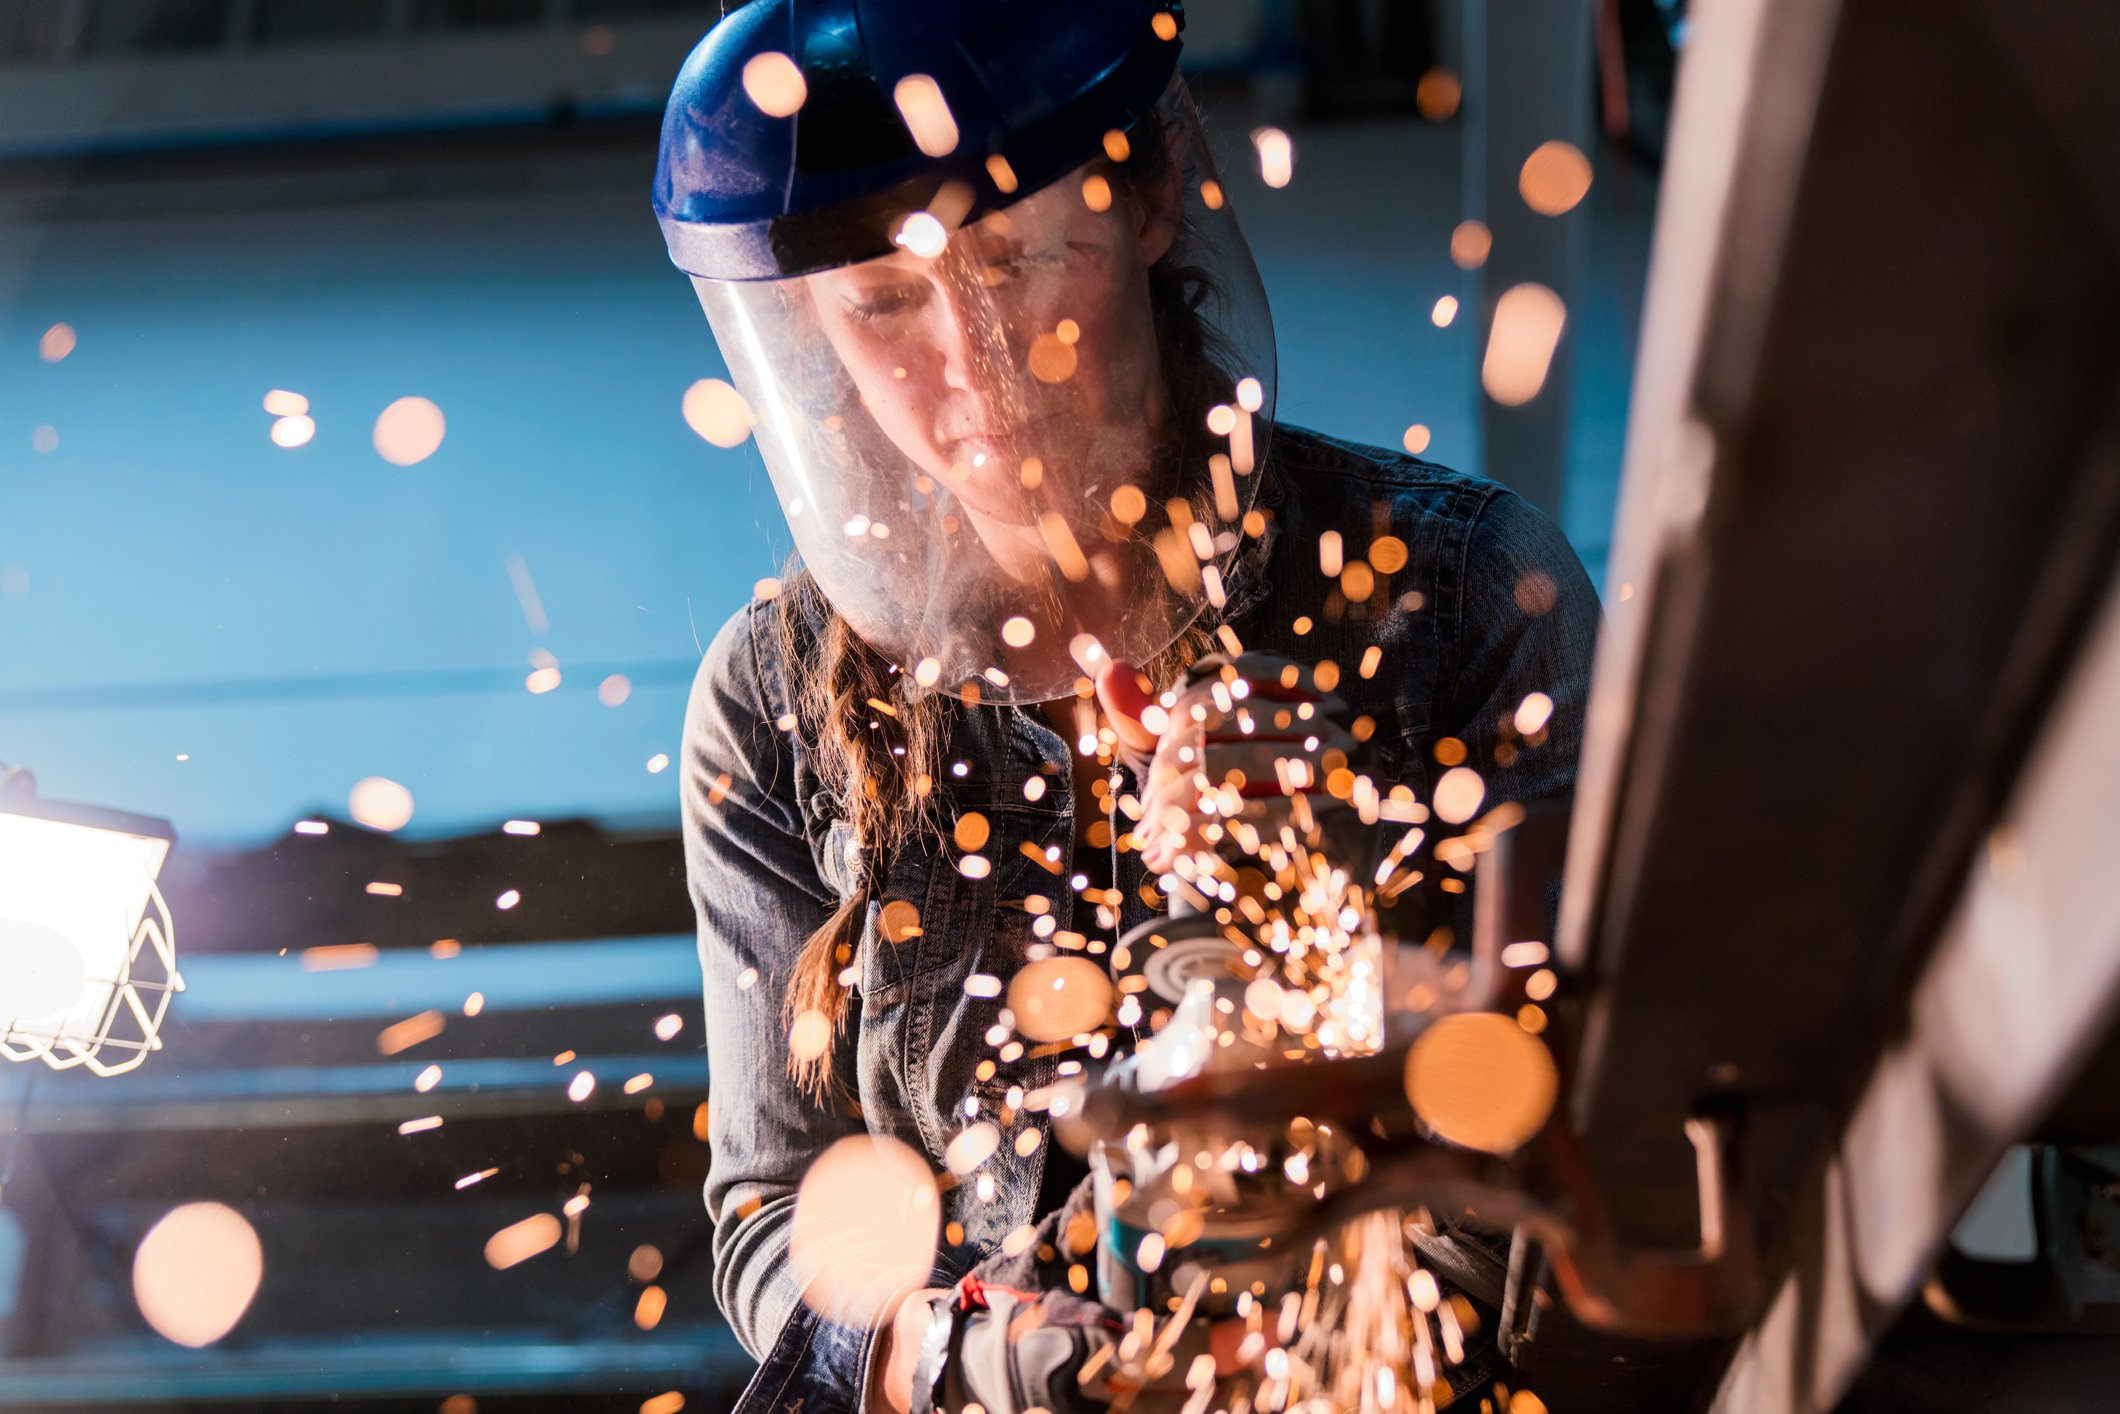 A female metalworker uses grinder tool, illuminating the foreground in flickering sparks 